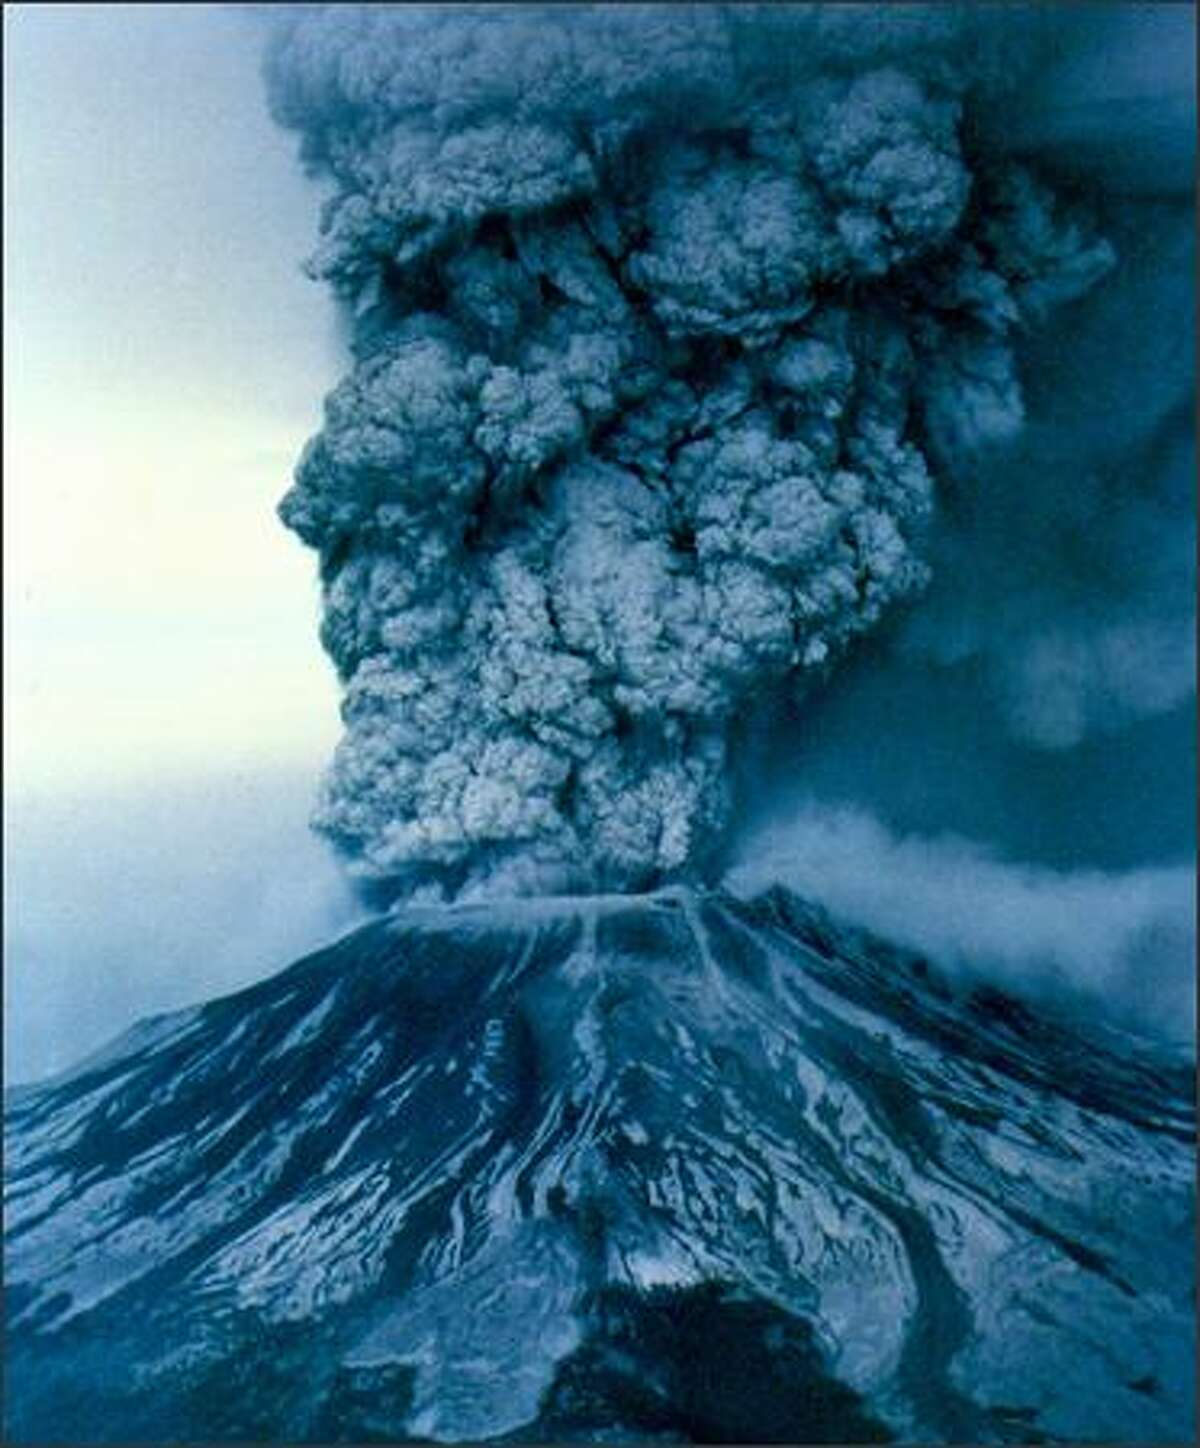 On May 18, 1980, Mount St. Helens erupted, causing widespread damage and sending ash thousands of feet into the air. P-I file photo by Grant M. Haller